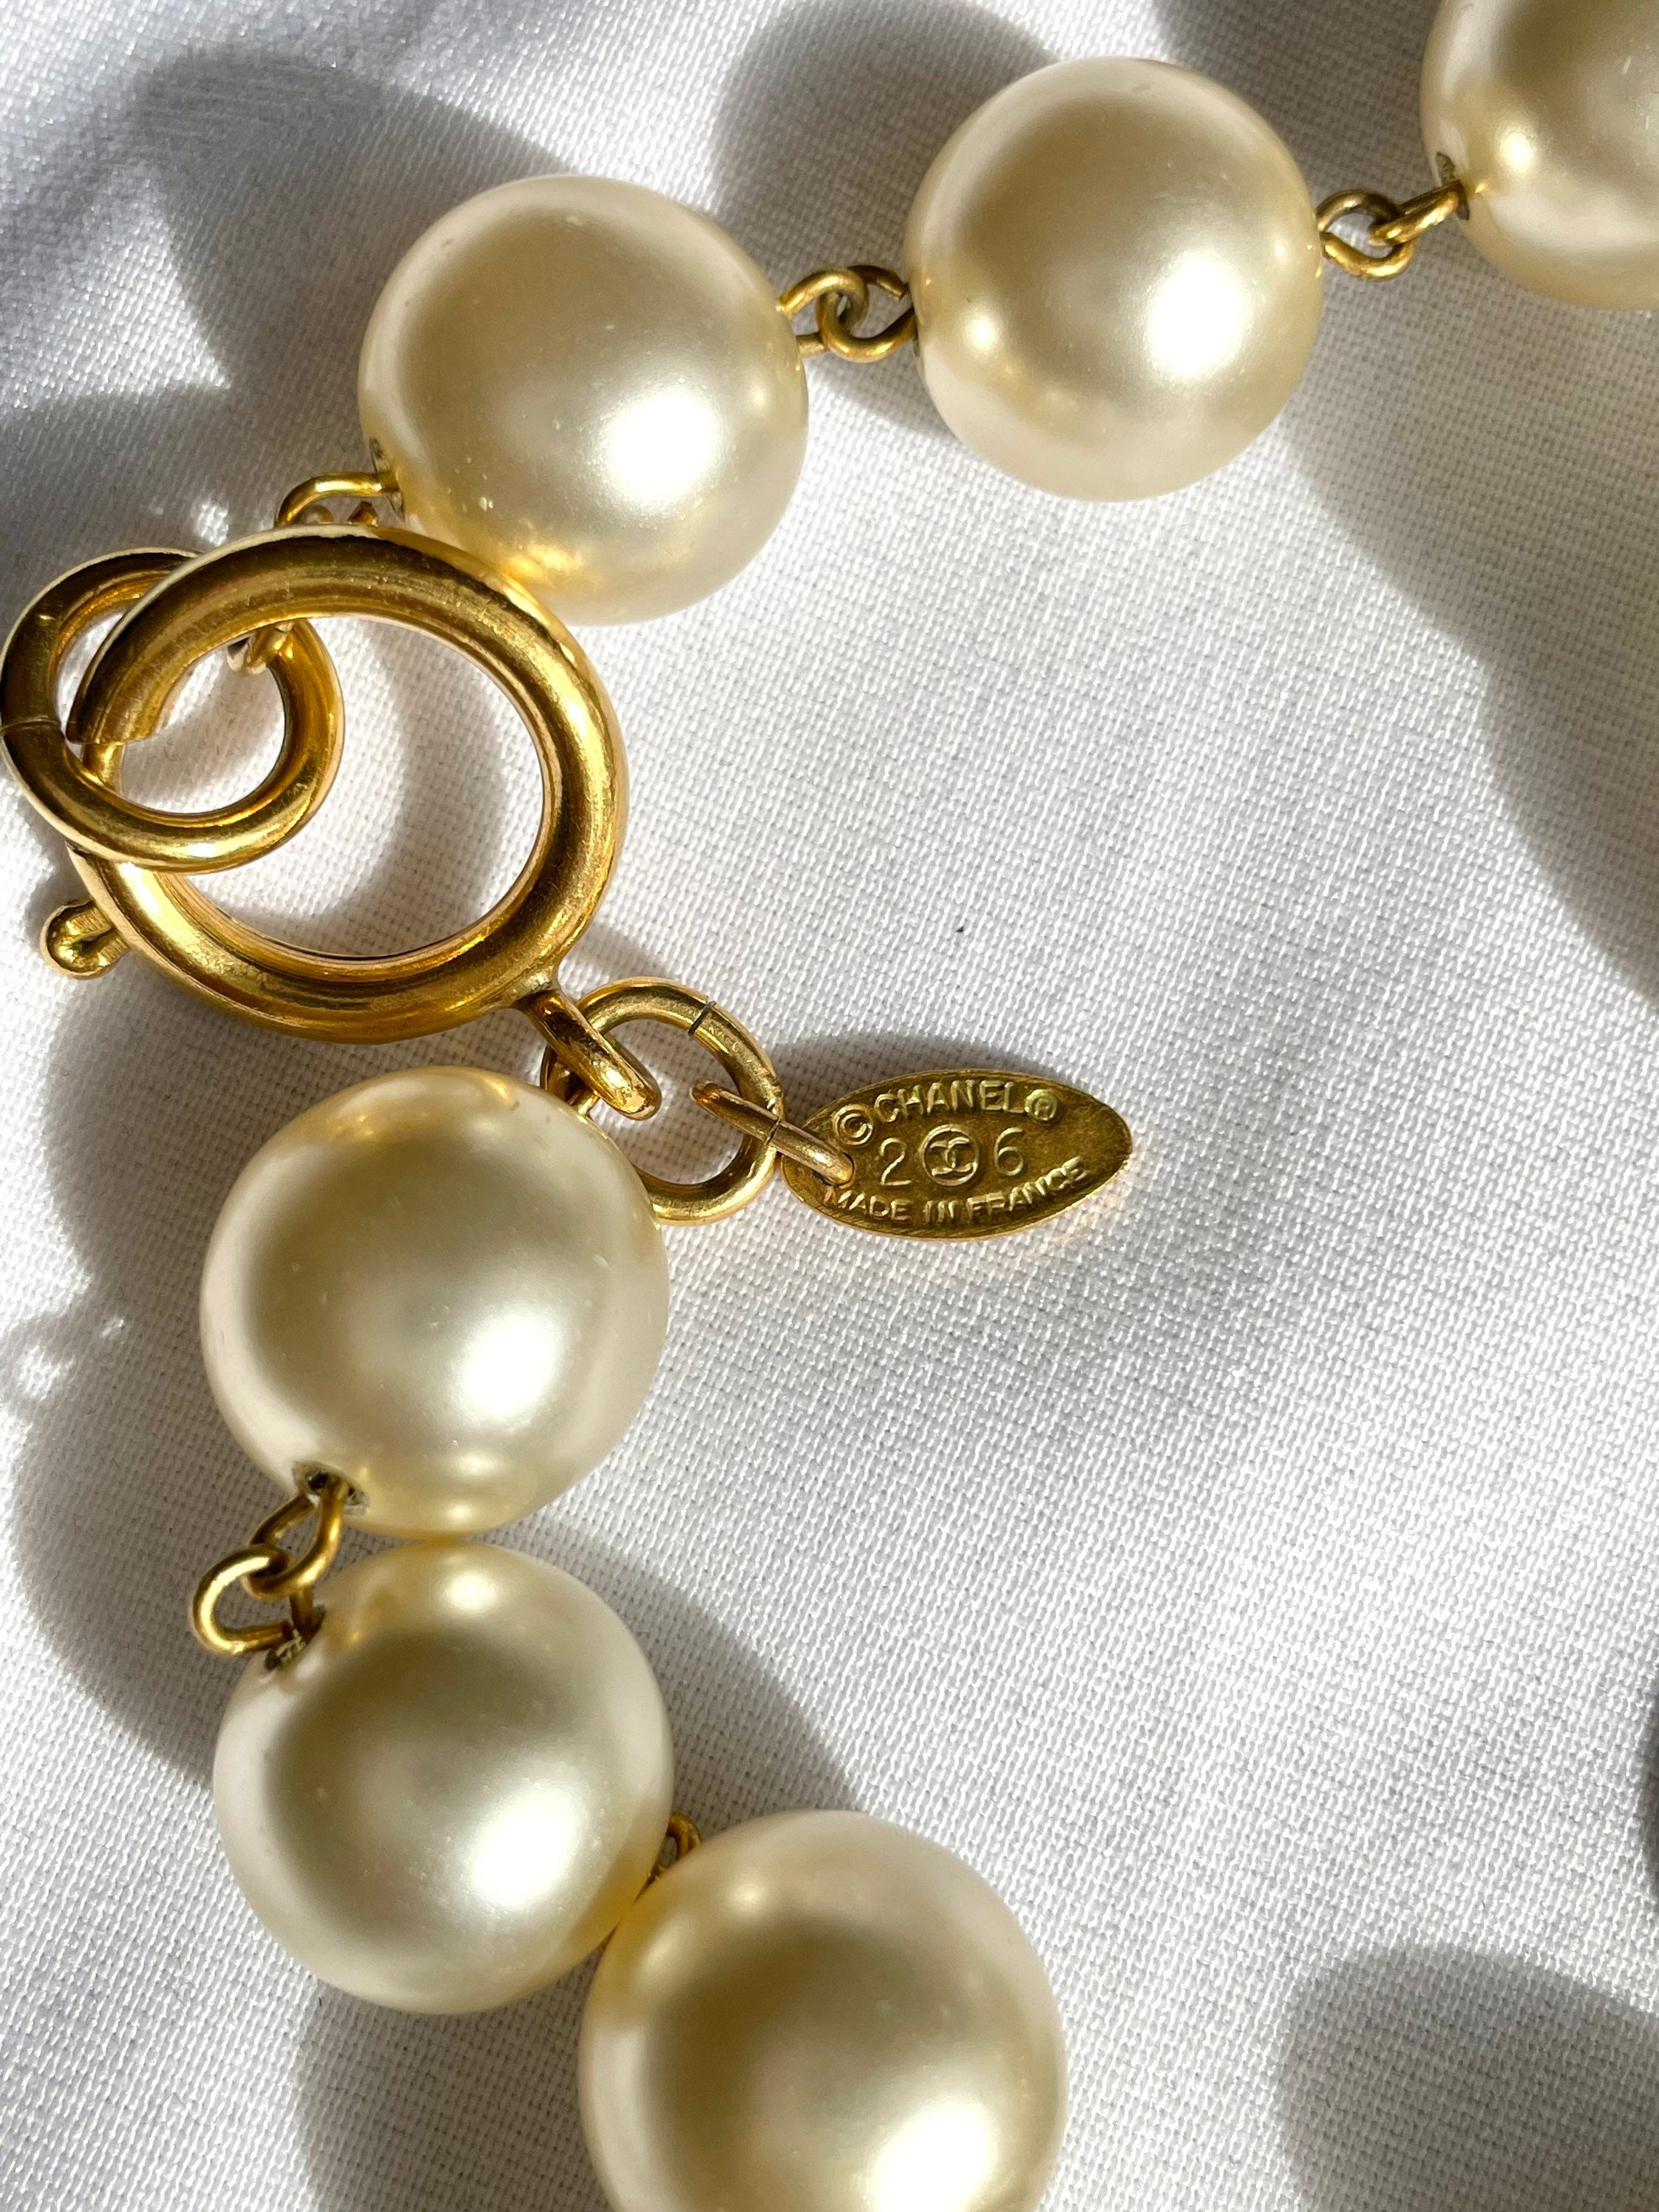 Vintage CHANEL Classic Faux Pearl Necklace With Oval CC Coin 